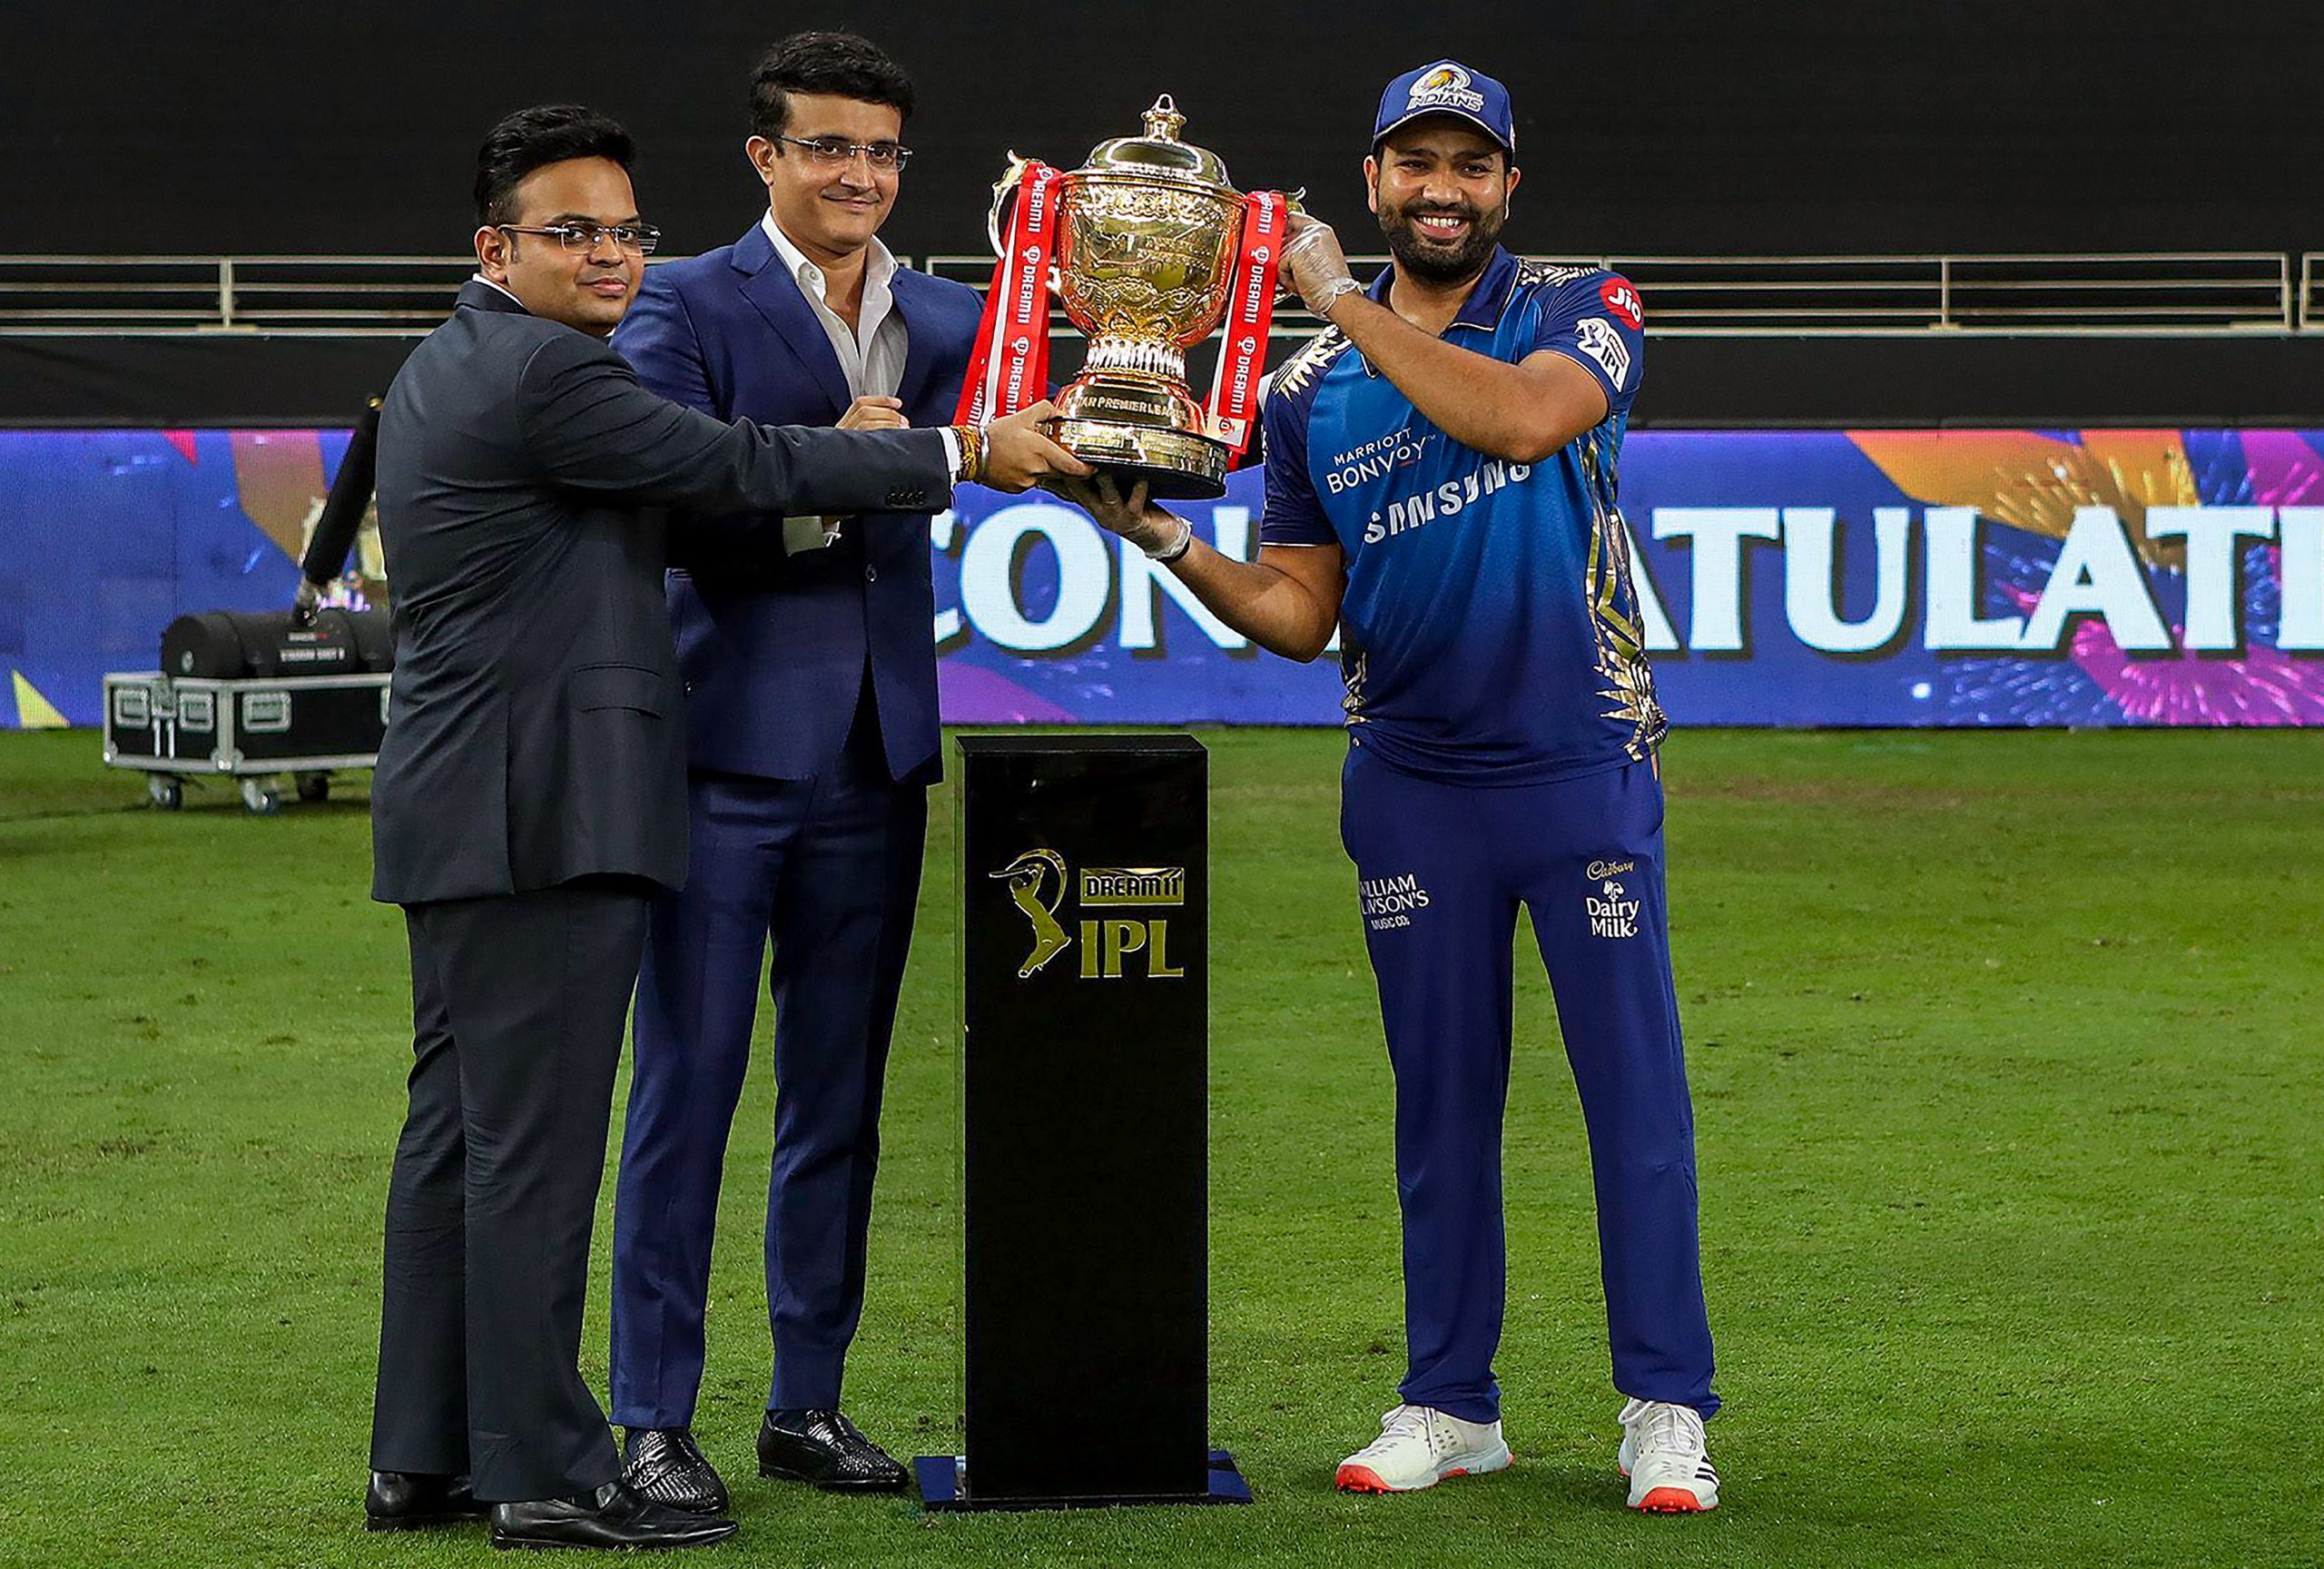 IPL 2021 will be much-needed diversion for COVID-weary viewers